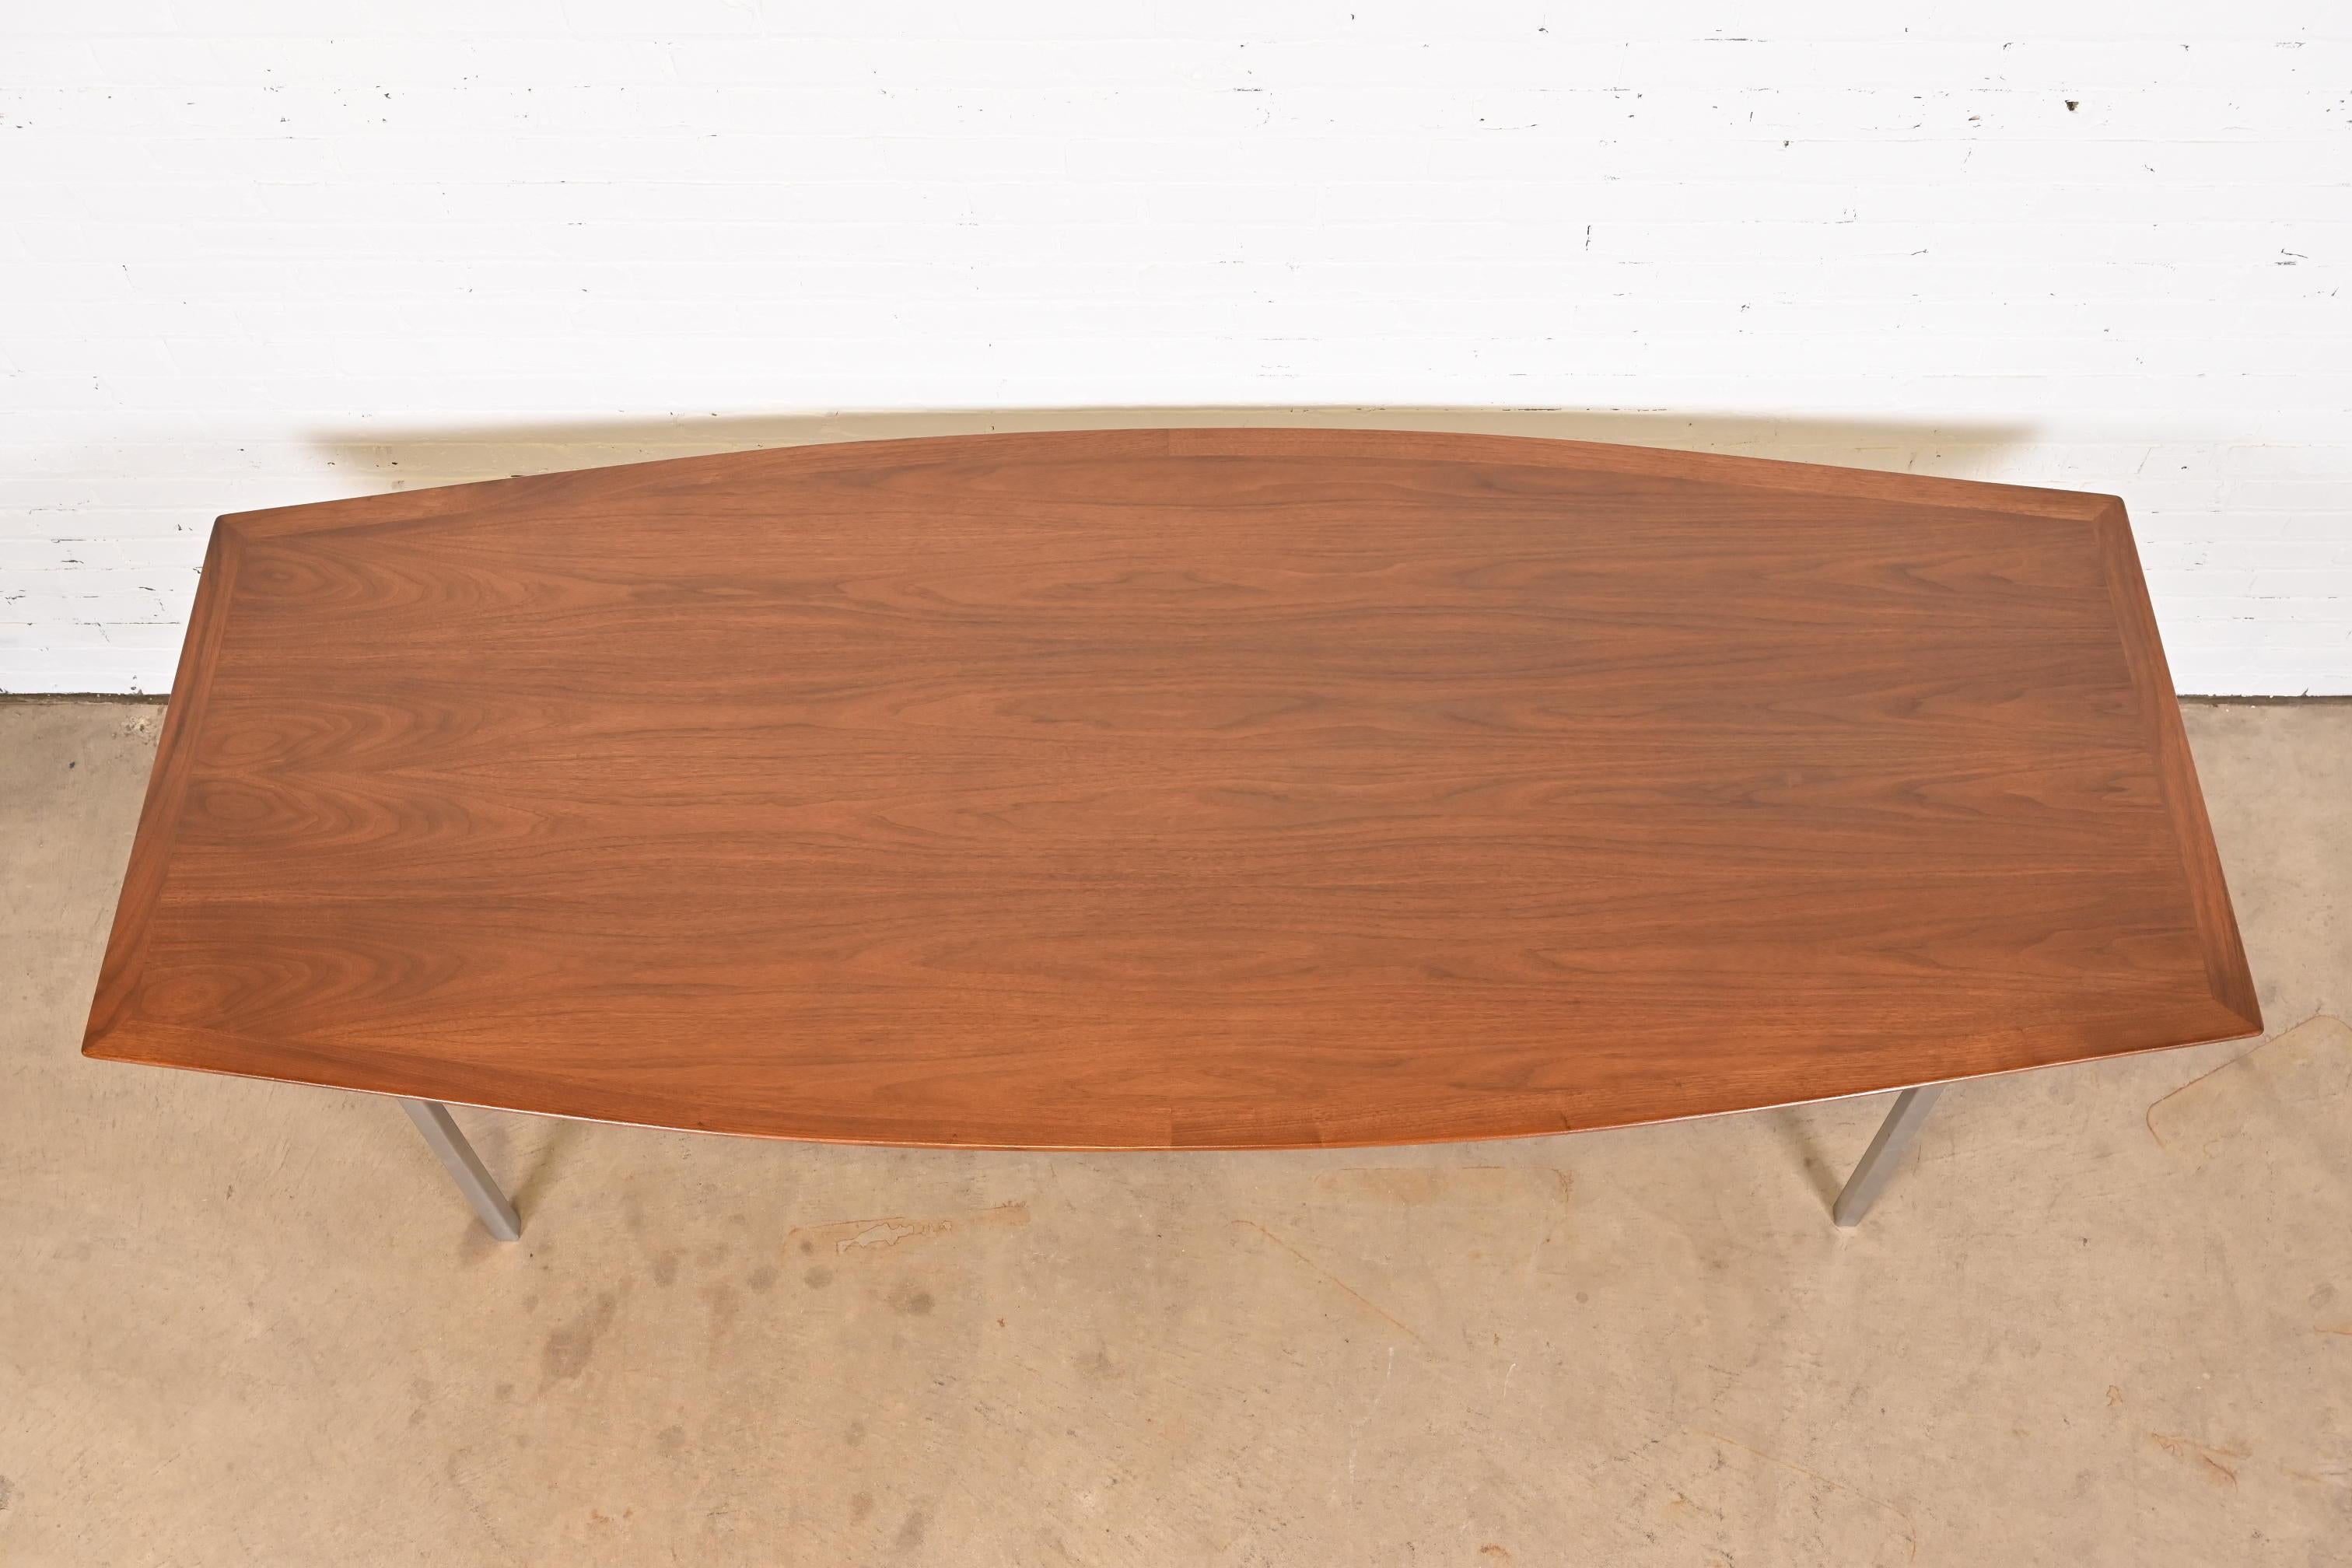 Florence Knoll Walnut Boat Shaped Conference or Dining Table, Newly Refinished 1